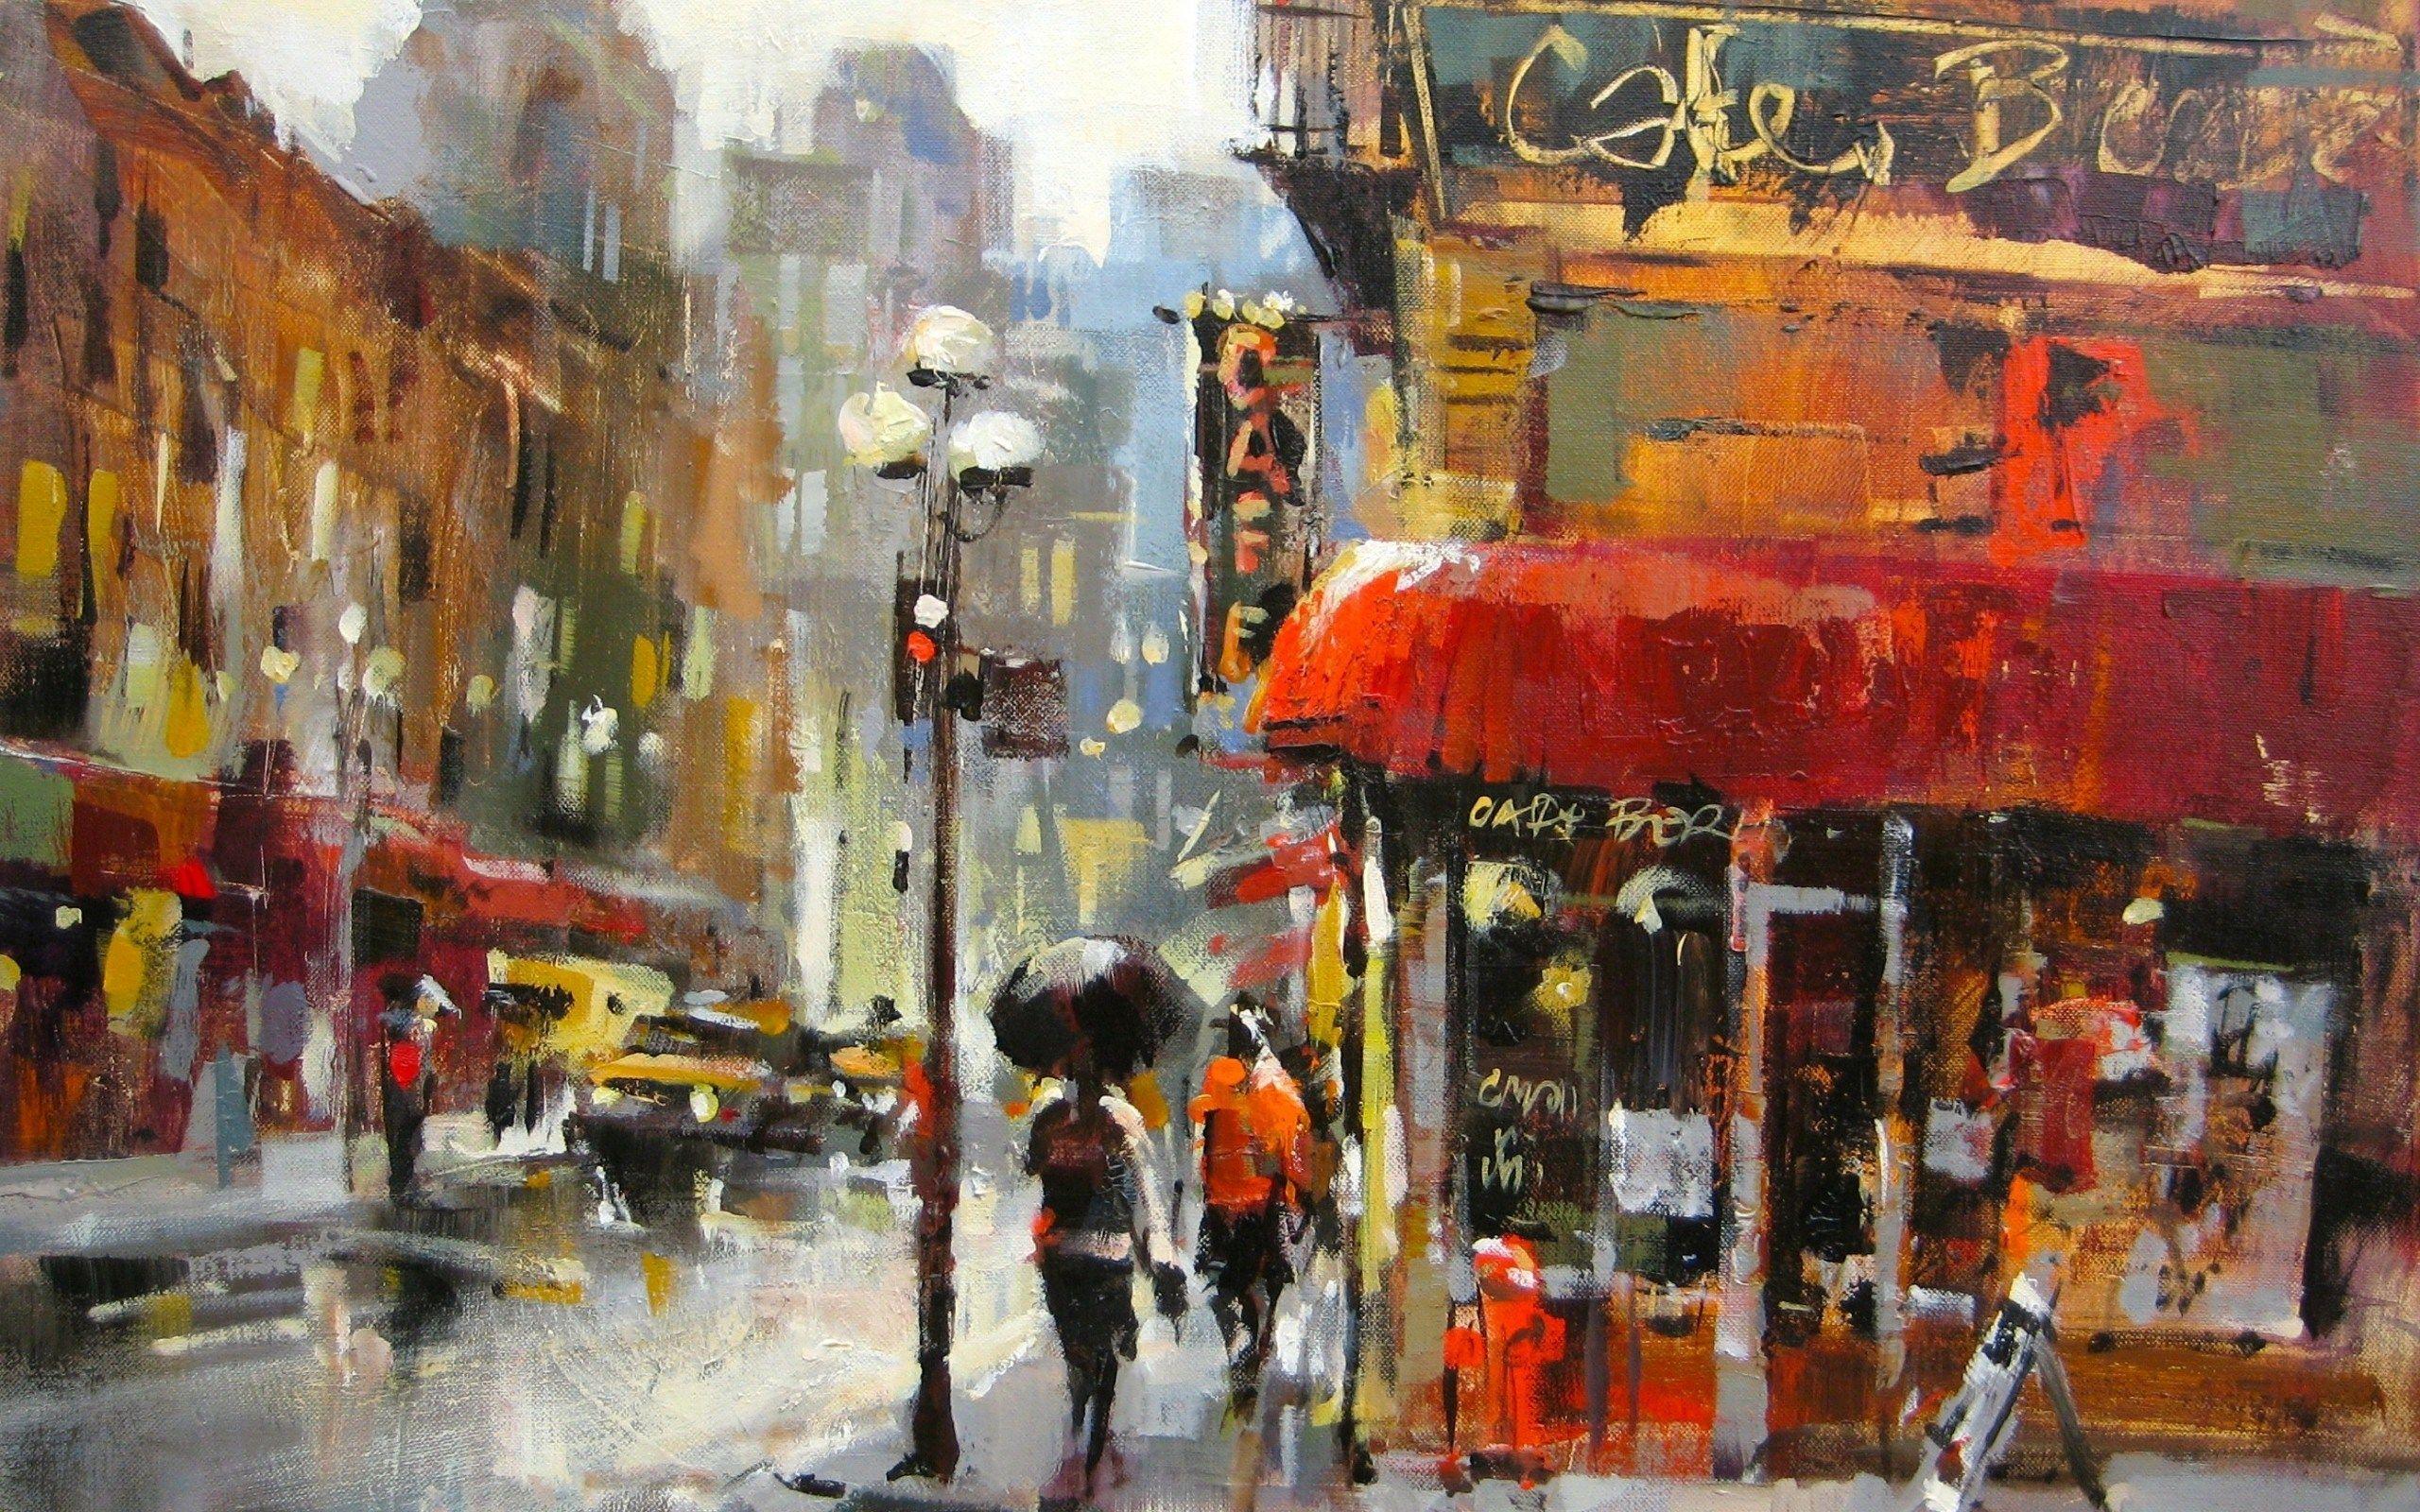 City Street Rainy Day Oil Painting HD Wallpaper. Cool Wallpaper